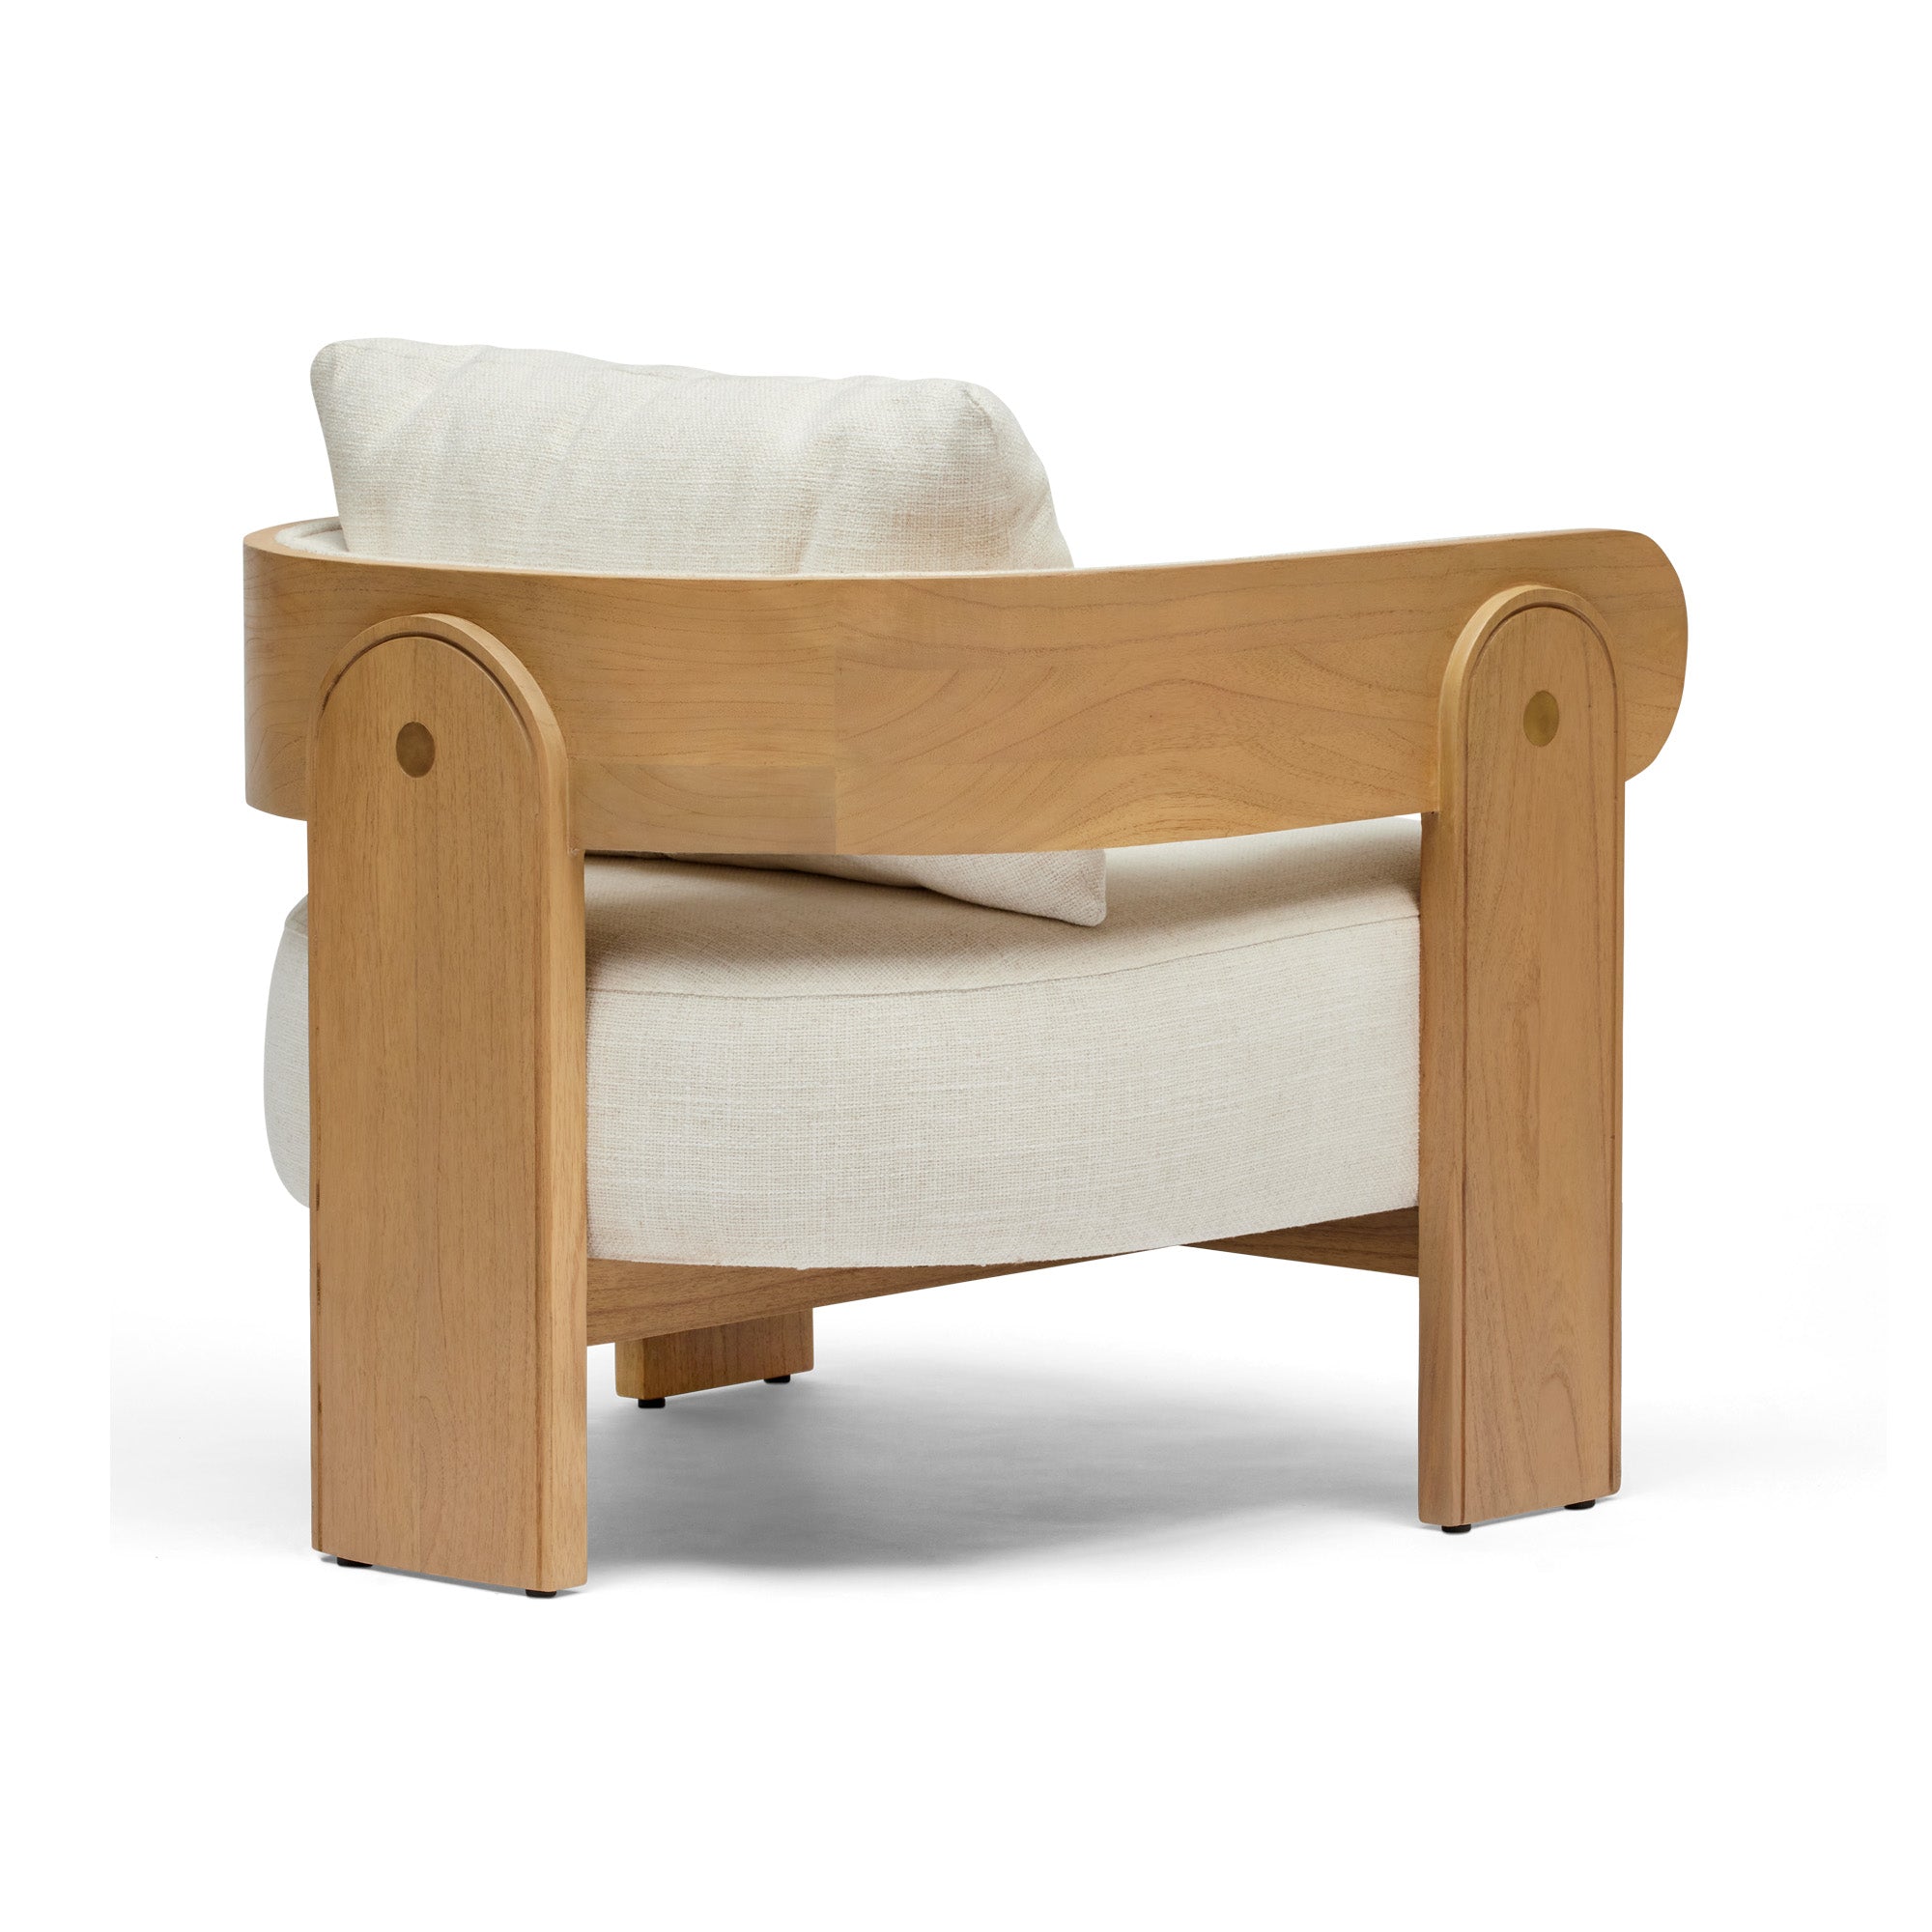 Lupin Occasional Chair